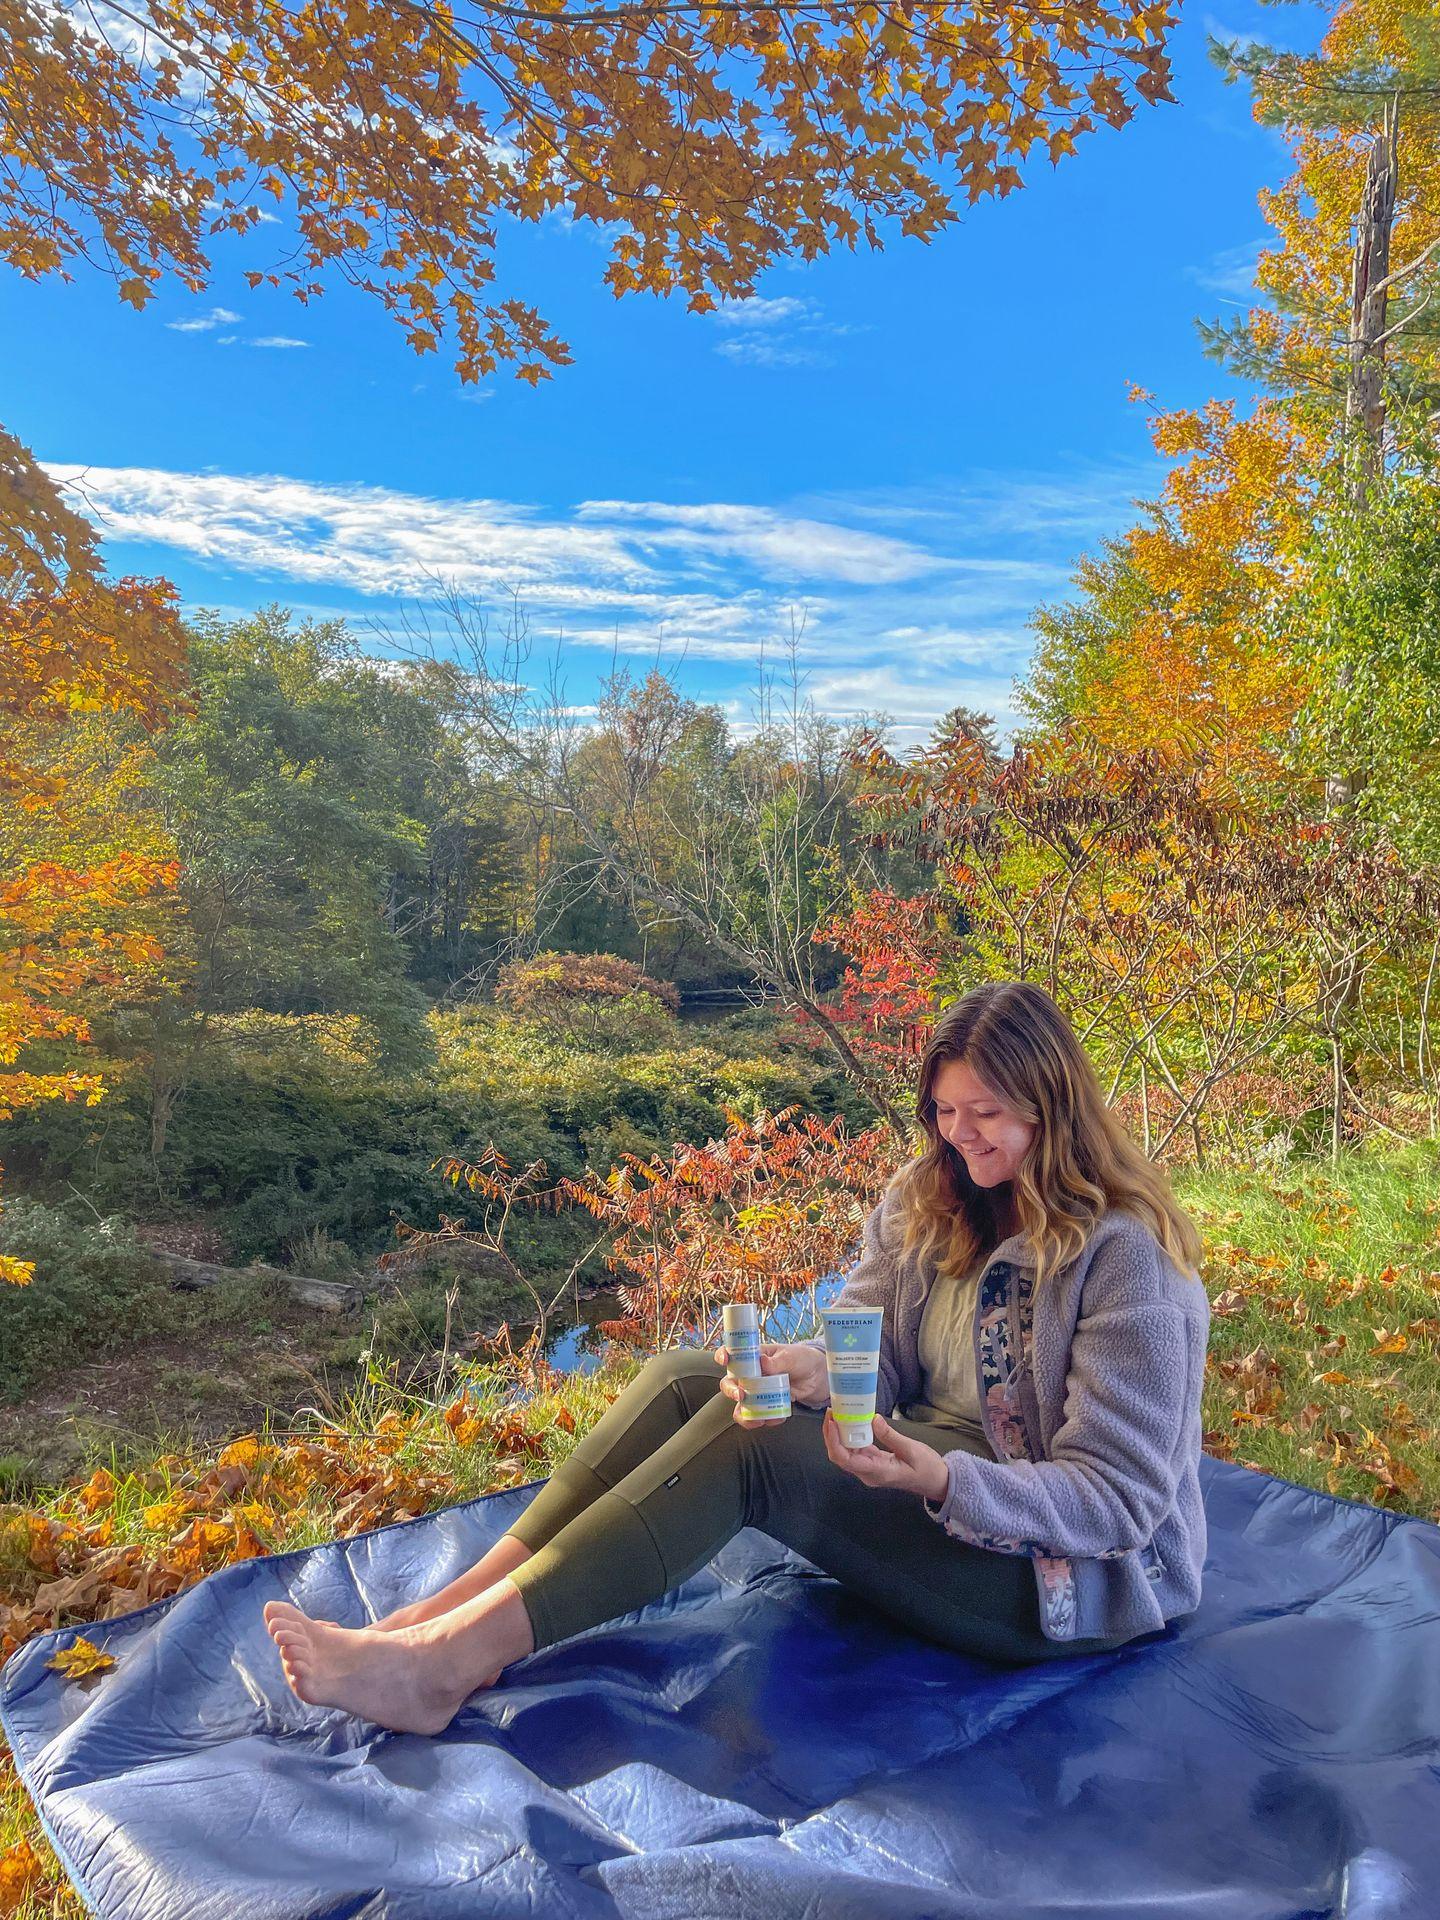 Lydia holding up foot care products from Pedestrian Project while sitting on a blue tarp. There is fall foliage in the background.